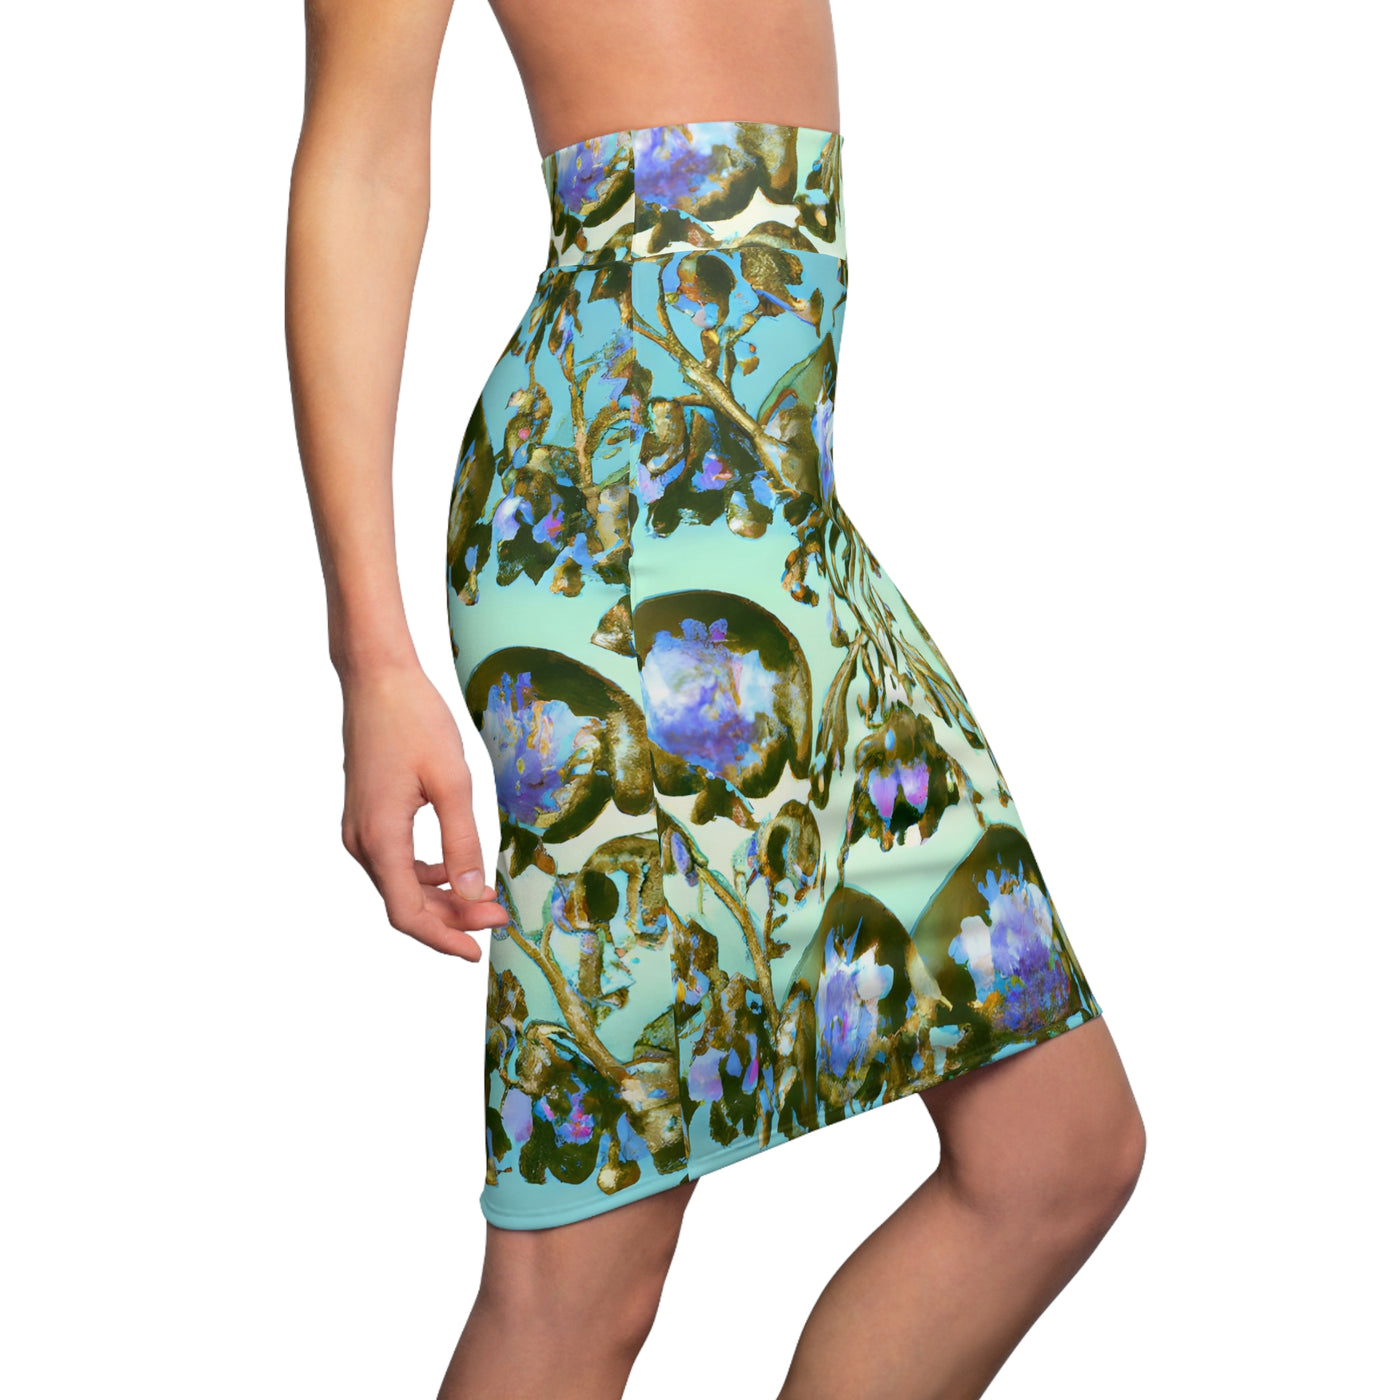 "Rugby Scrum of Color" Women's Pencil Skirt